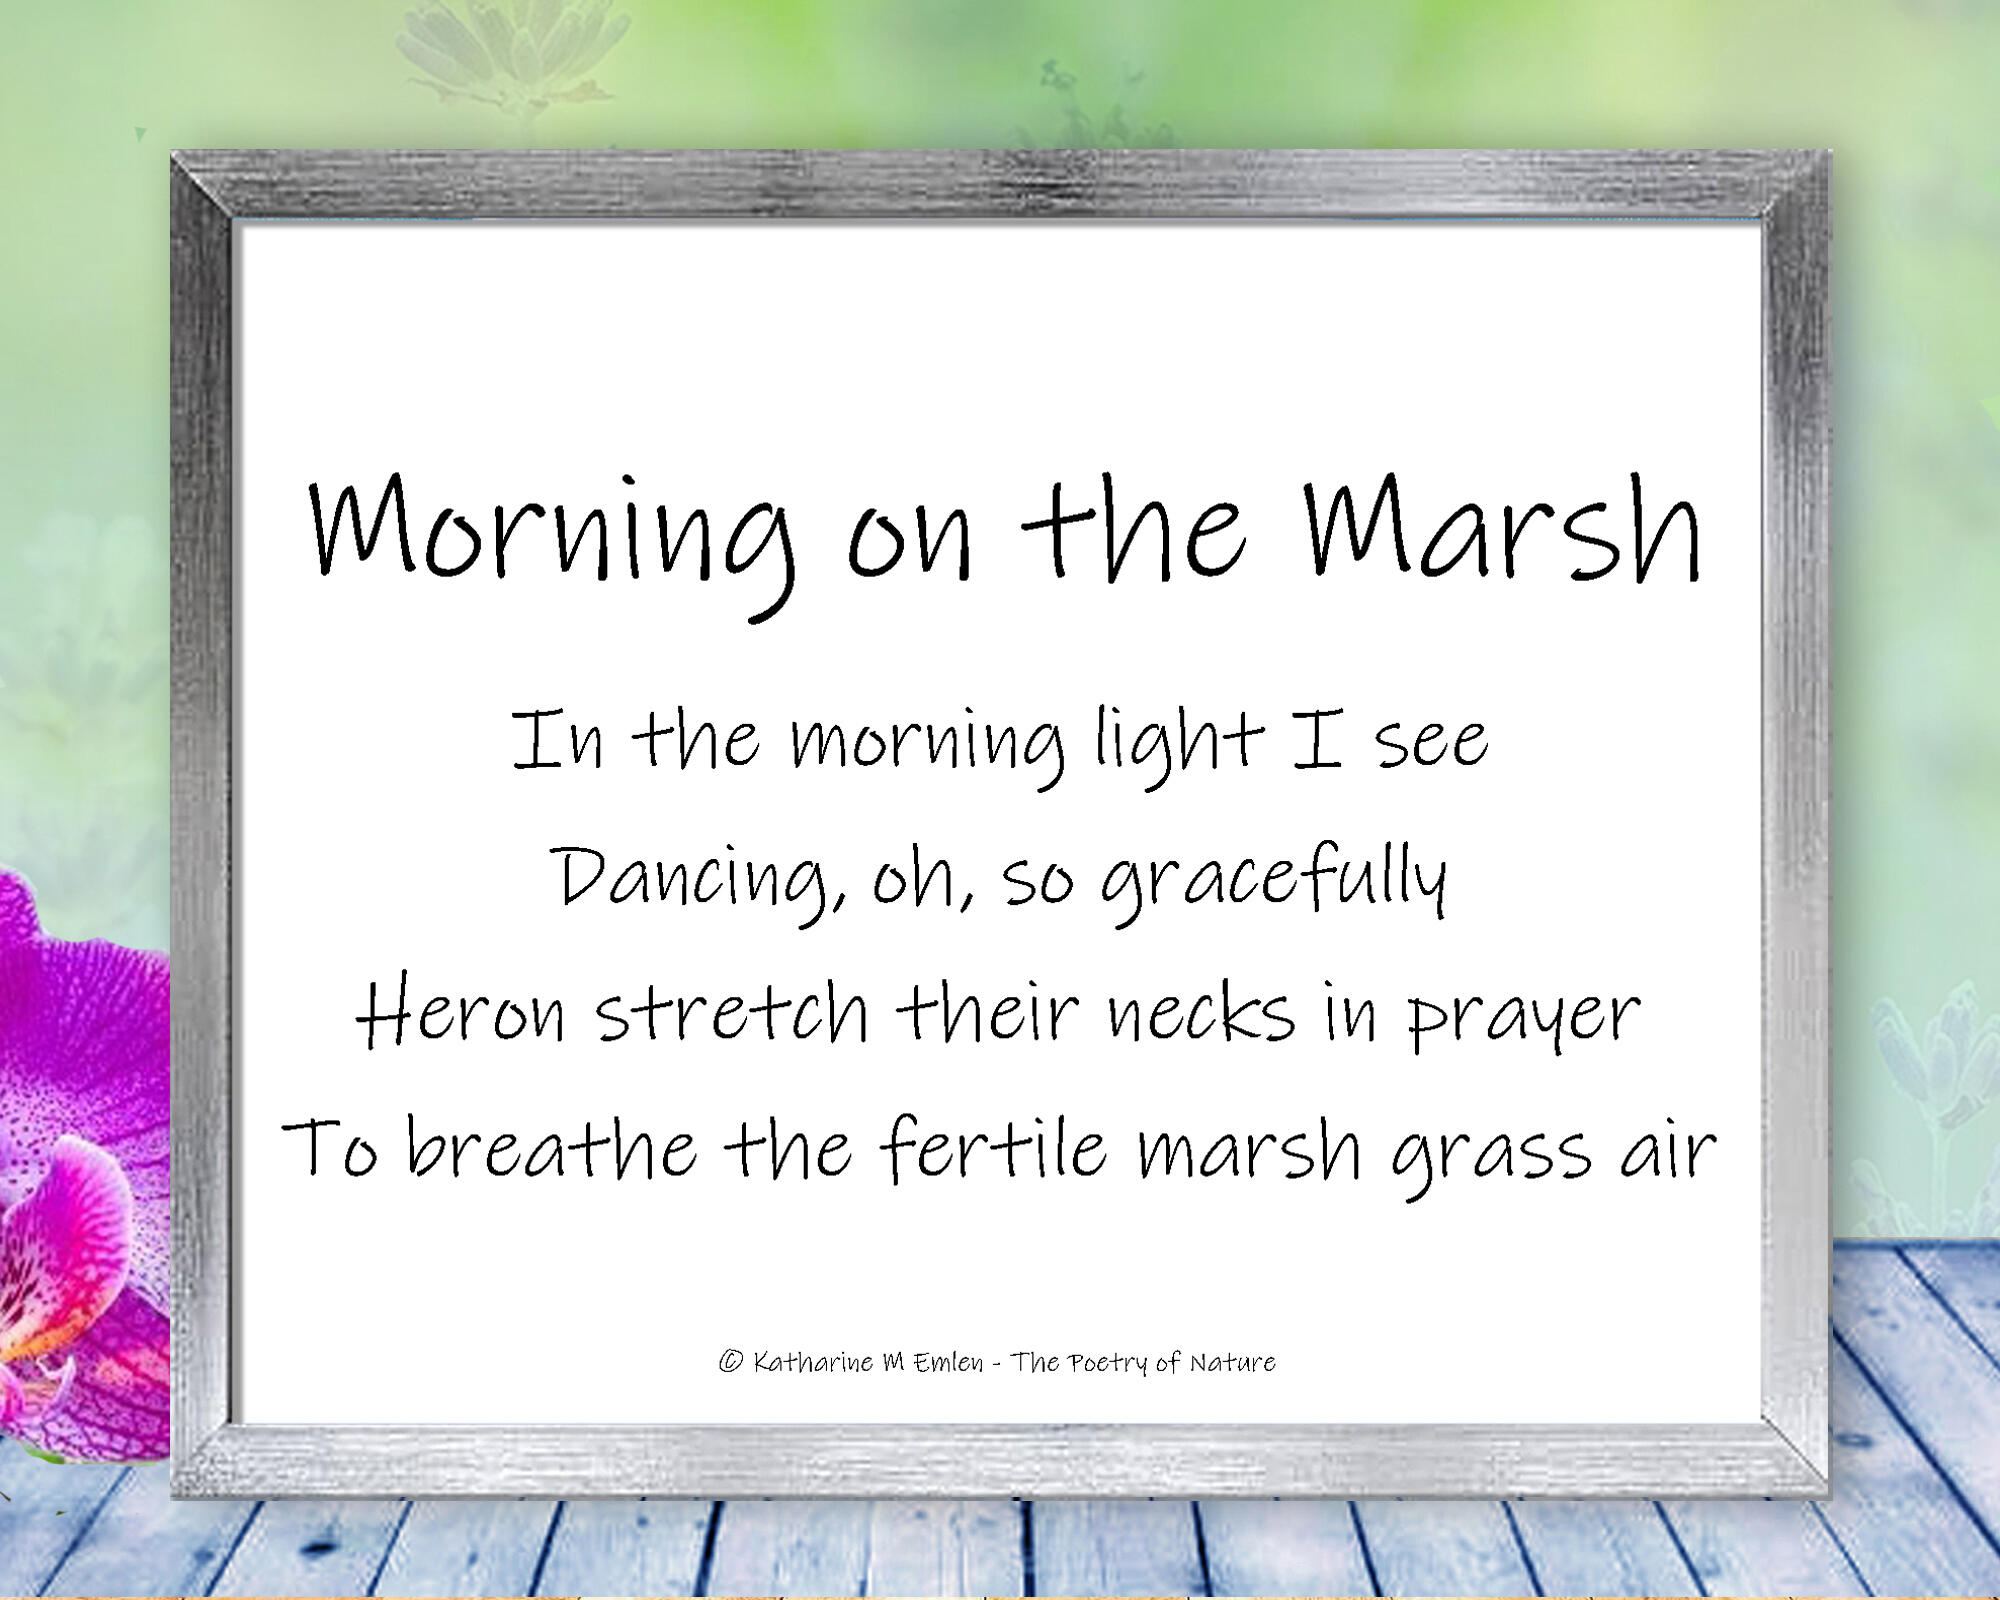 Poem for Morning on the Marsh - Heron dance on the edge of a lake, or so it seems, in this haunting, beautiful, nature print with poem - Morning on the Marsh by The Poetry of Nature